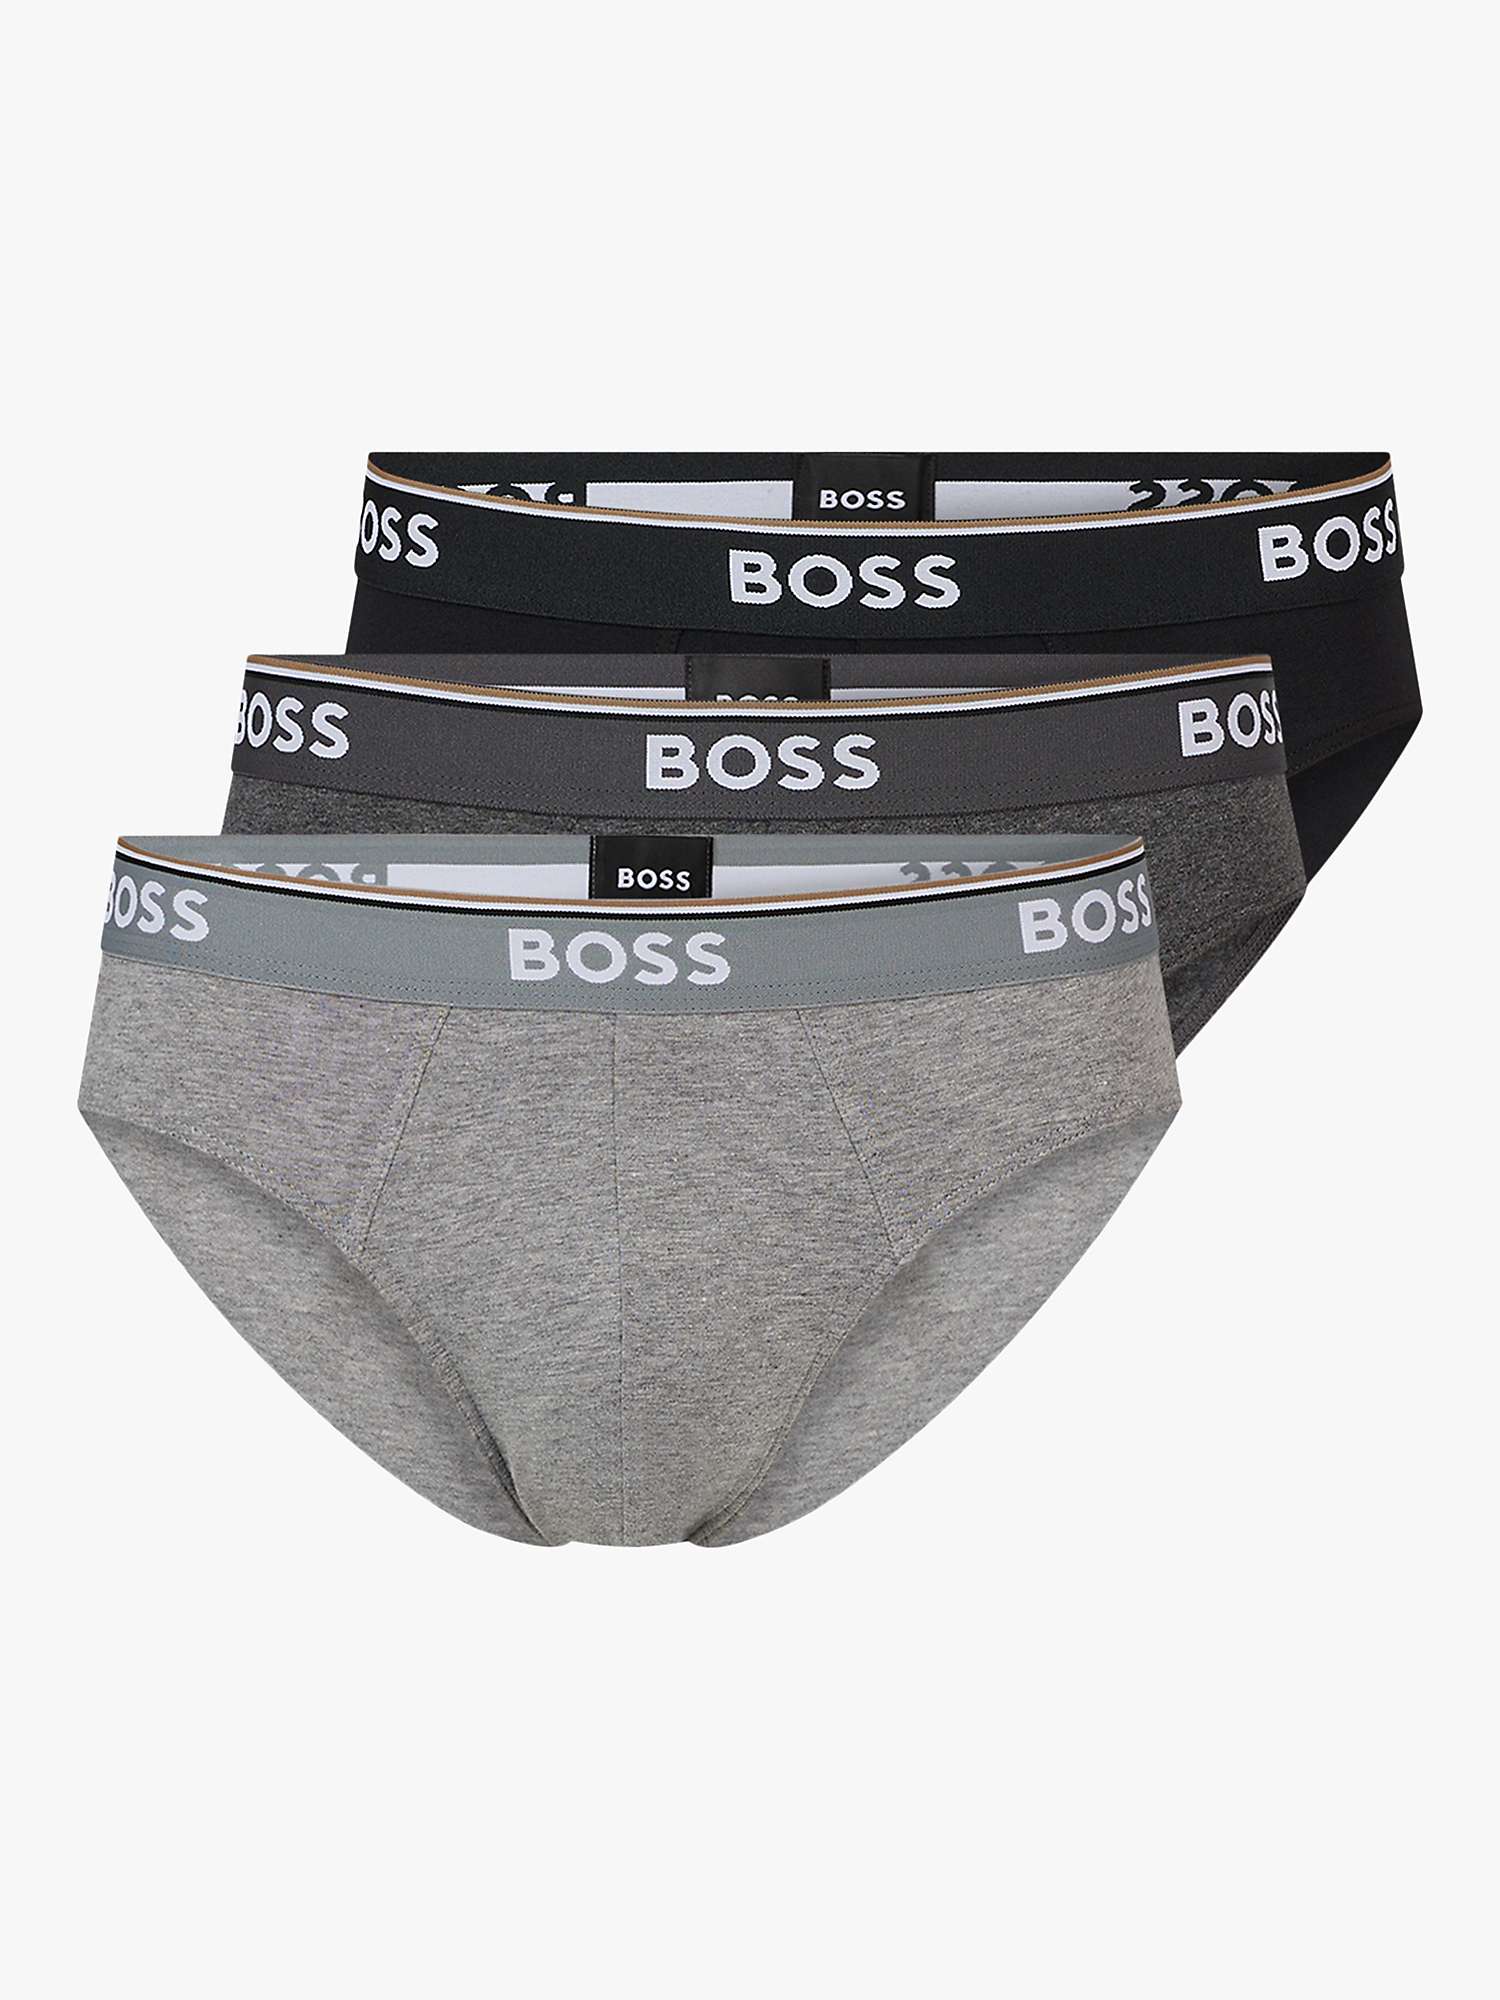 BOSS Stretch Power Briefs, Pack of 3, Open Grey at John Lewis & Partners